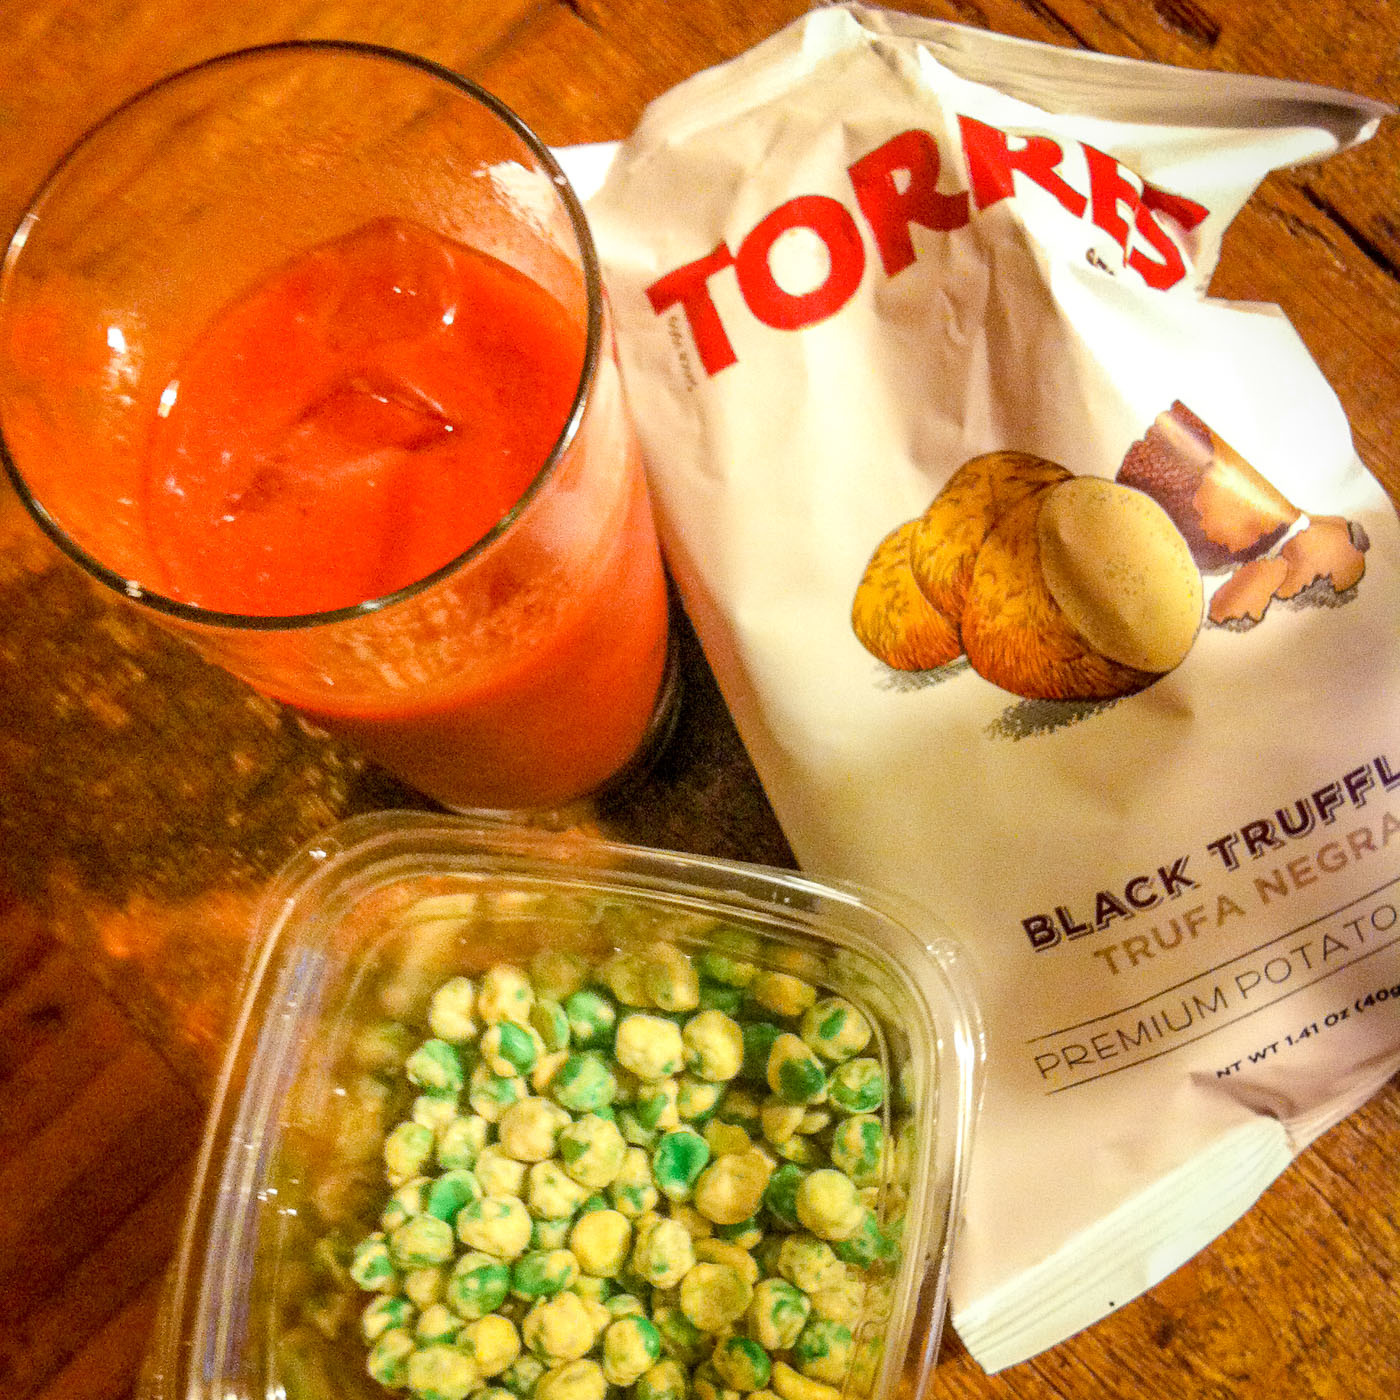 A Bloody Mary with wasabi peas for that perfect after work lift. For the truffle fans, try these insane black truffle potato chips too with a glass of wine.